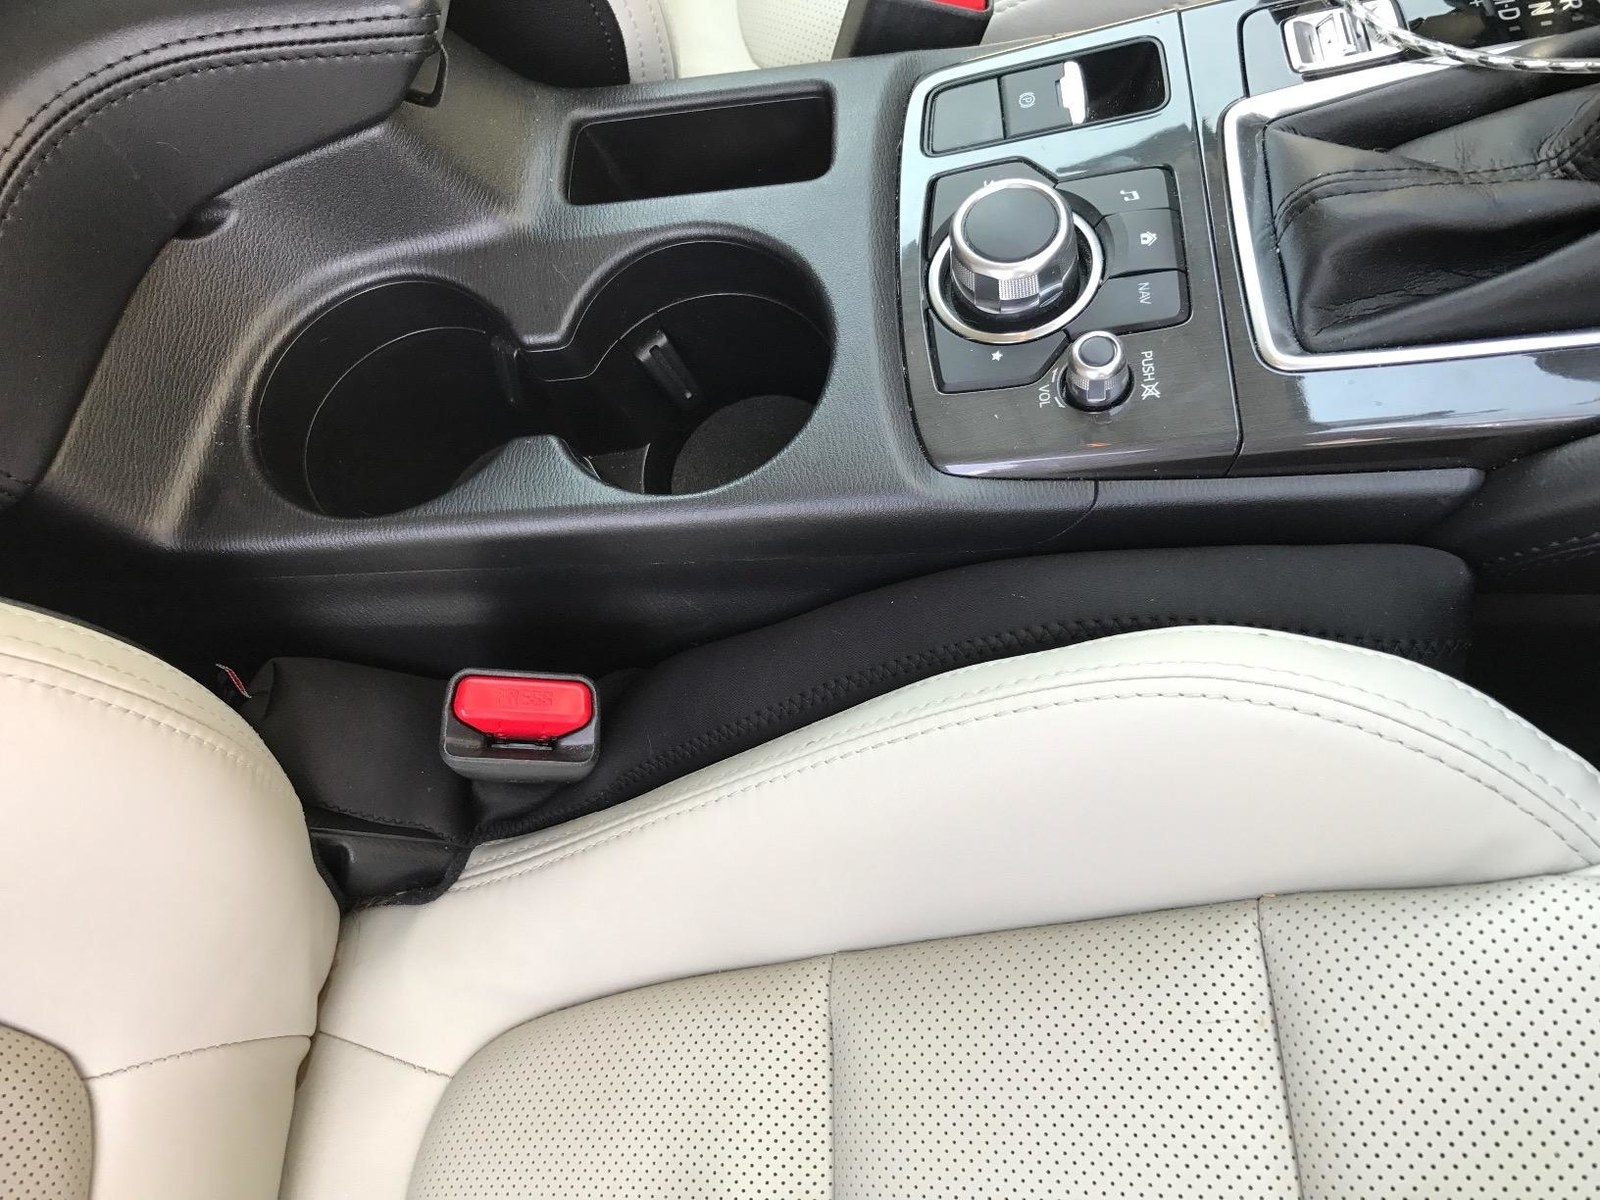 The seat gap filler filling the gap between a car seat and the center console